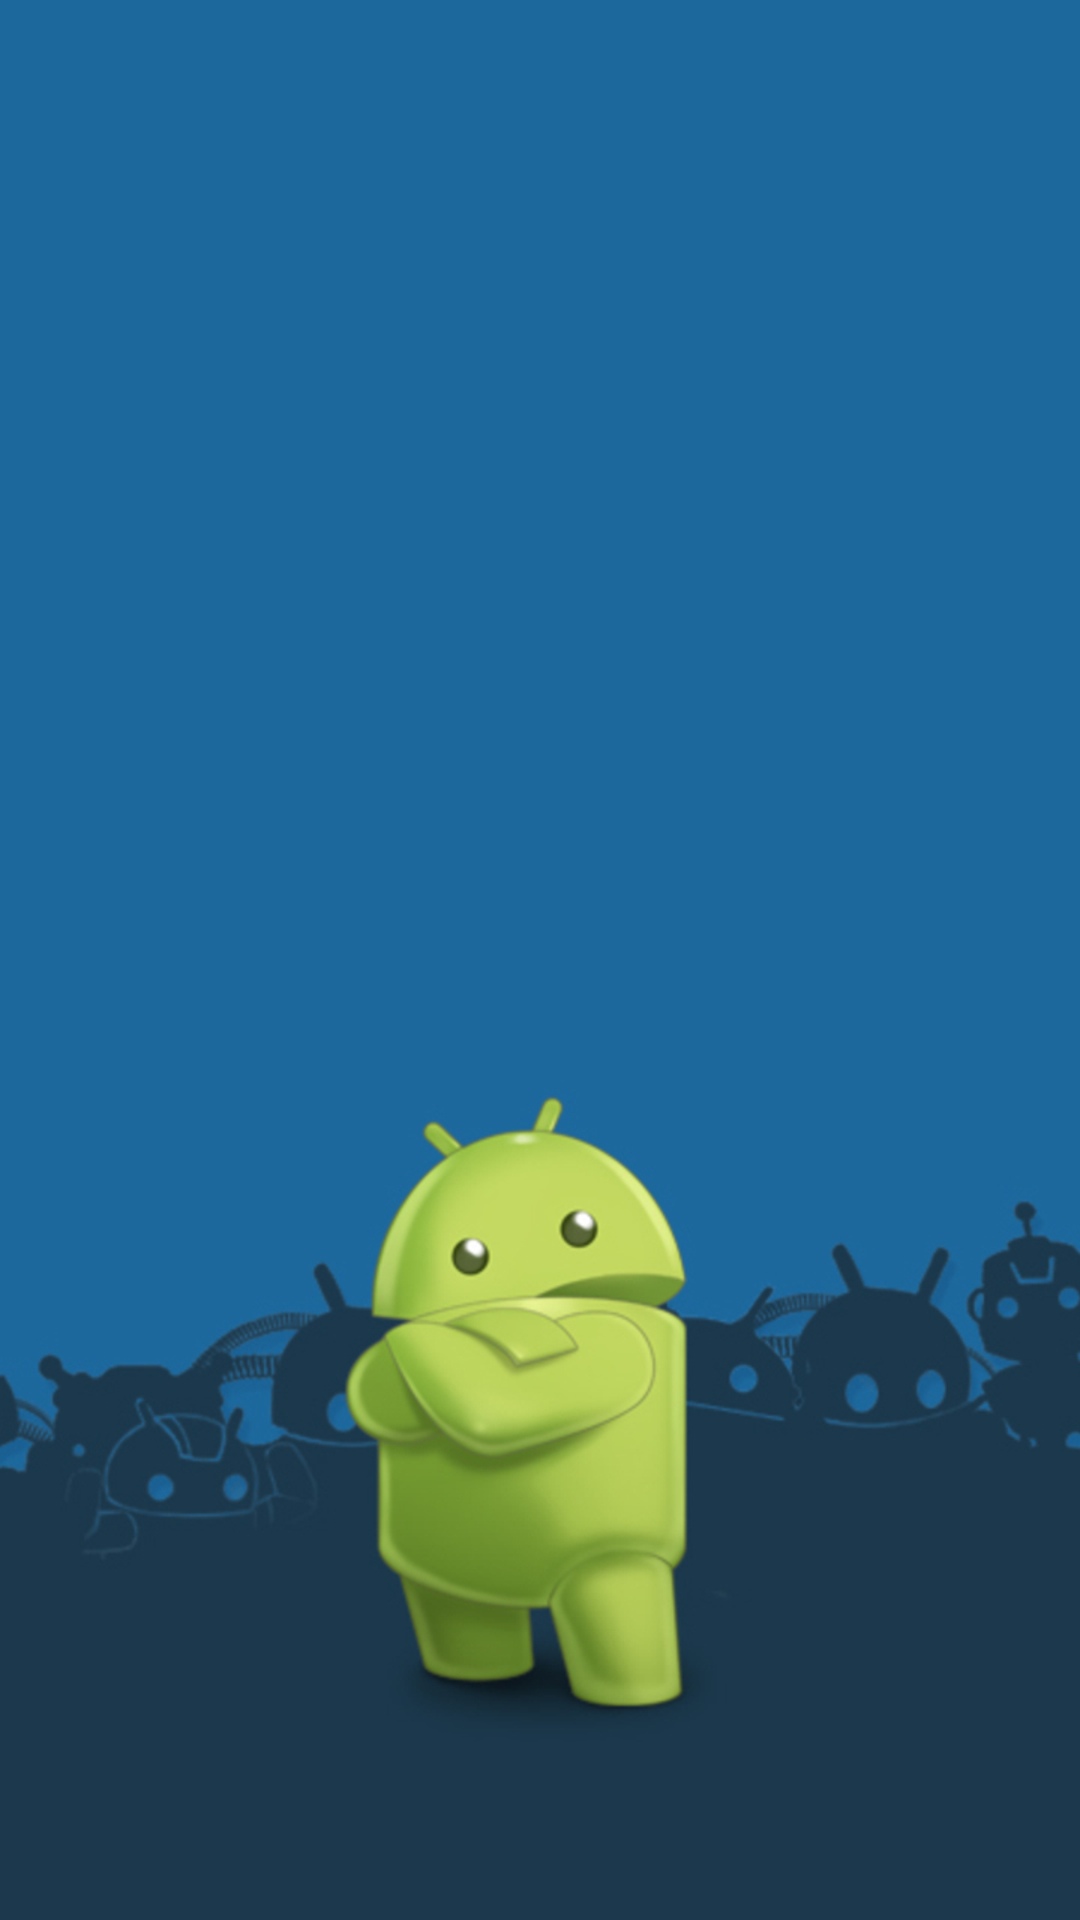 wallpapers for android smartphone,blue,green,cartoon,yellow,illustration